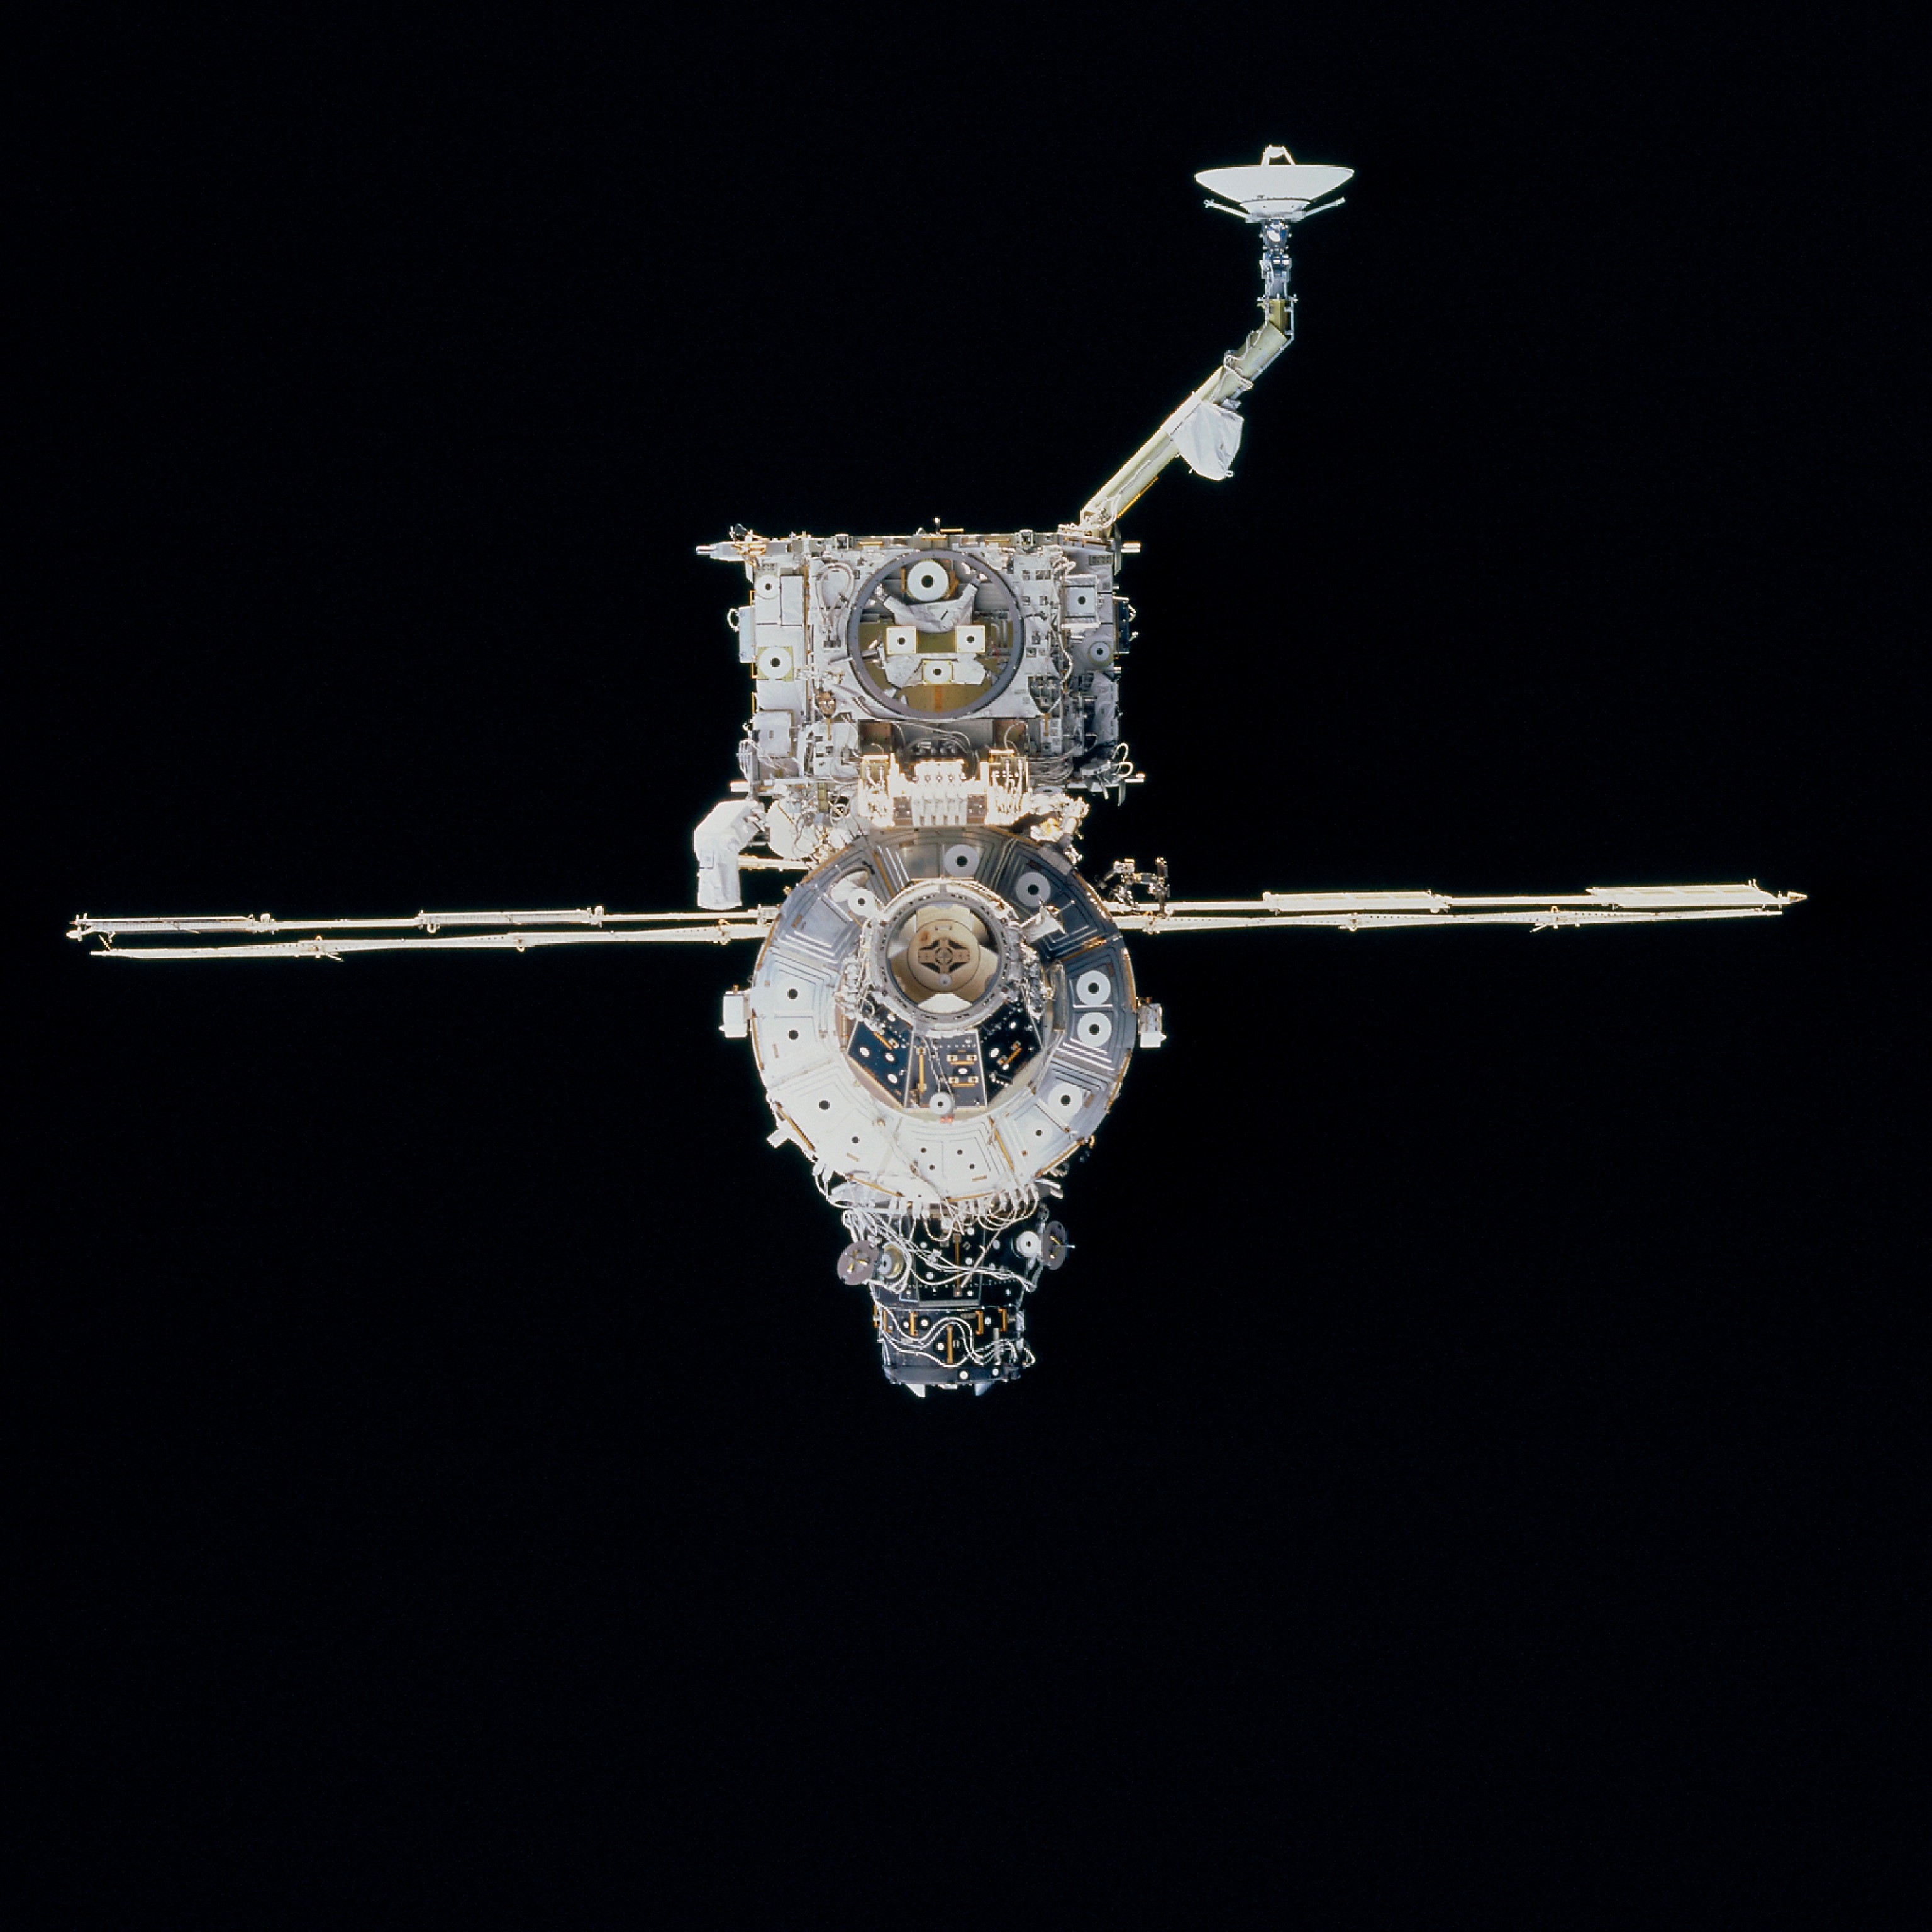 The space station as seen from Discovery shortly after undocking, showing the Z1 Truss with the Space-to-Ground Antenna at top and the third Pressurized Mating Adaptor at bottom.